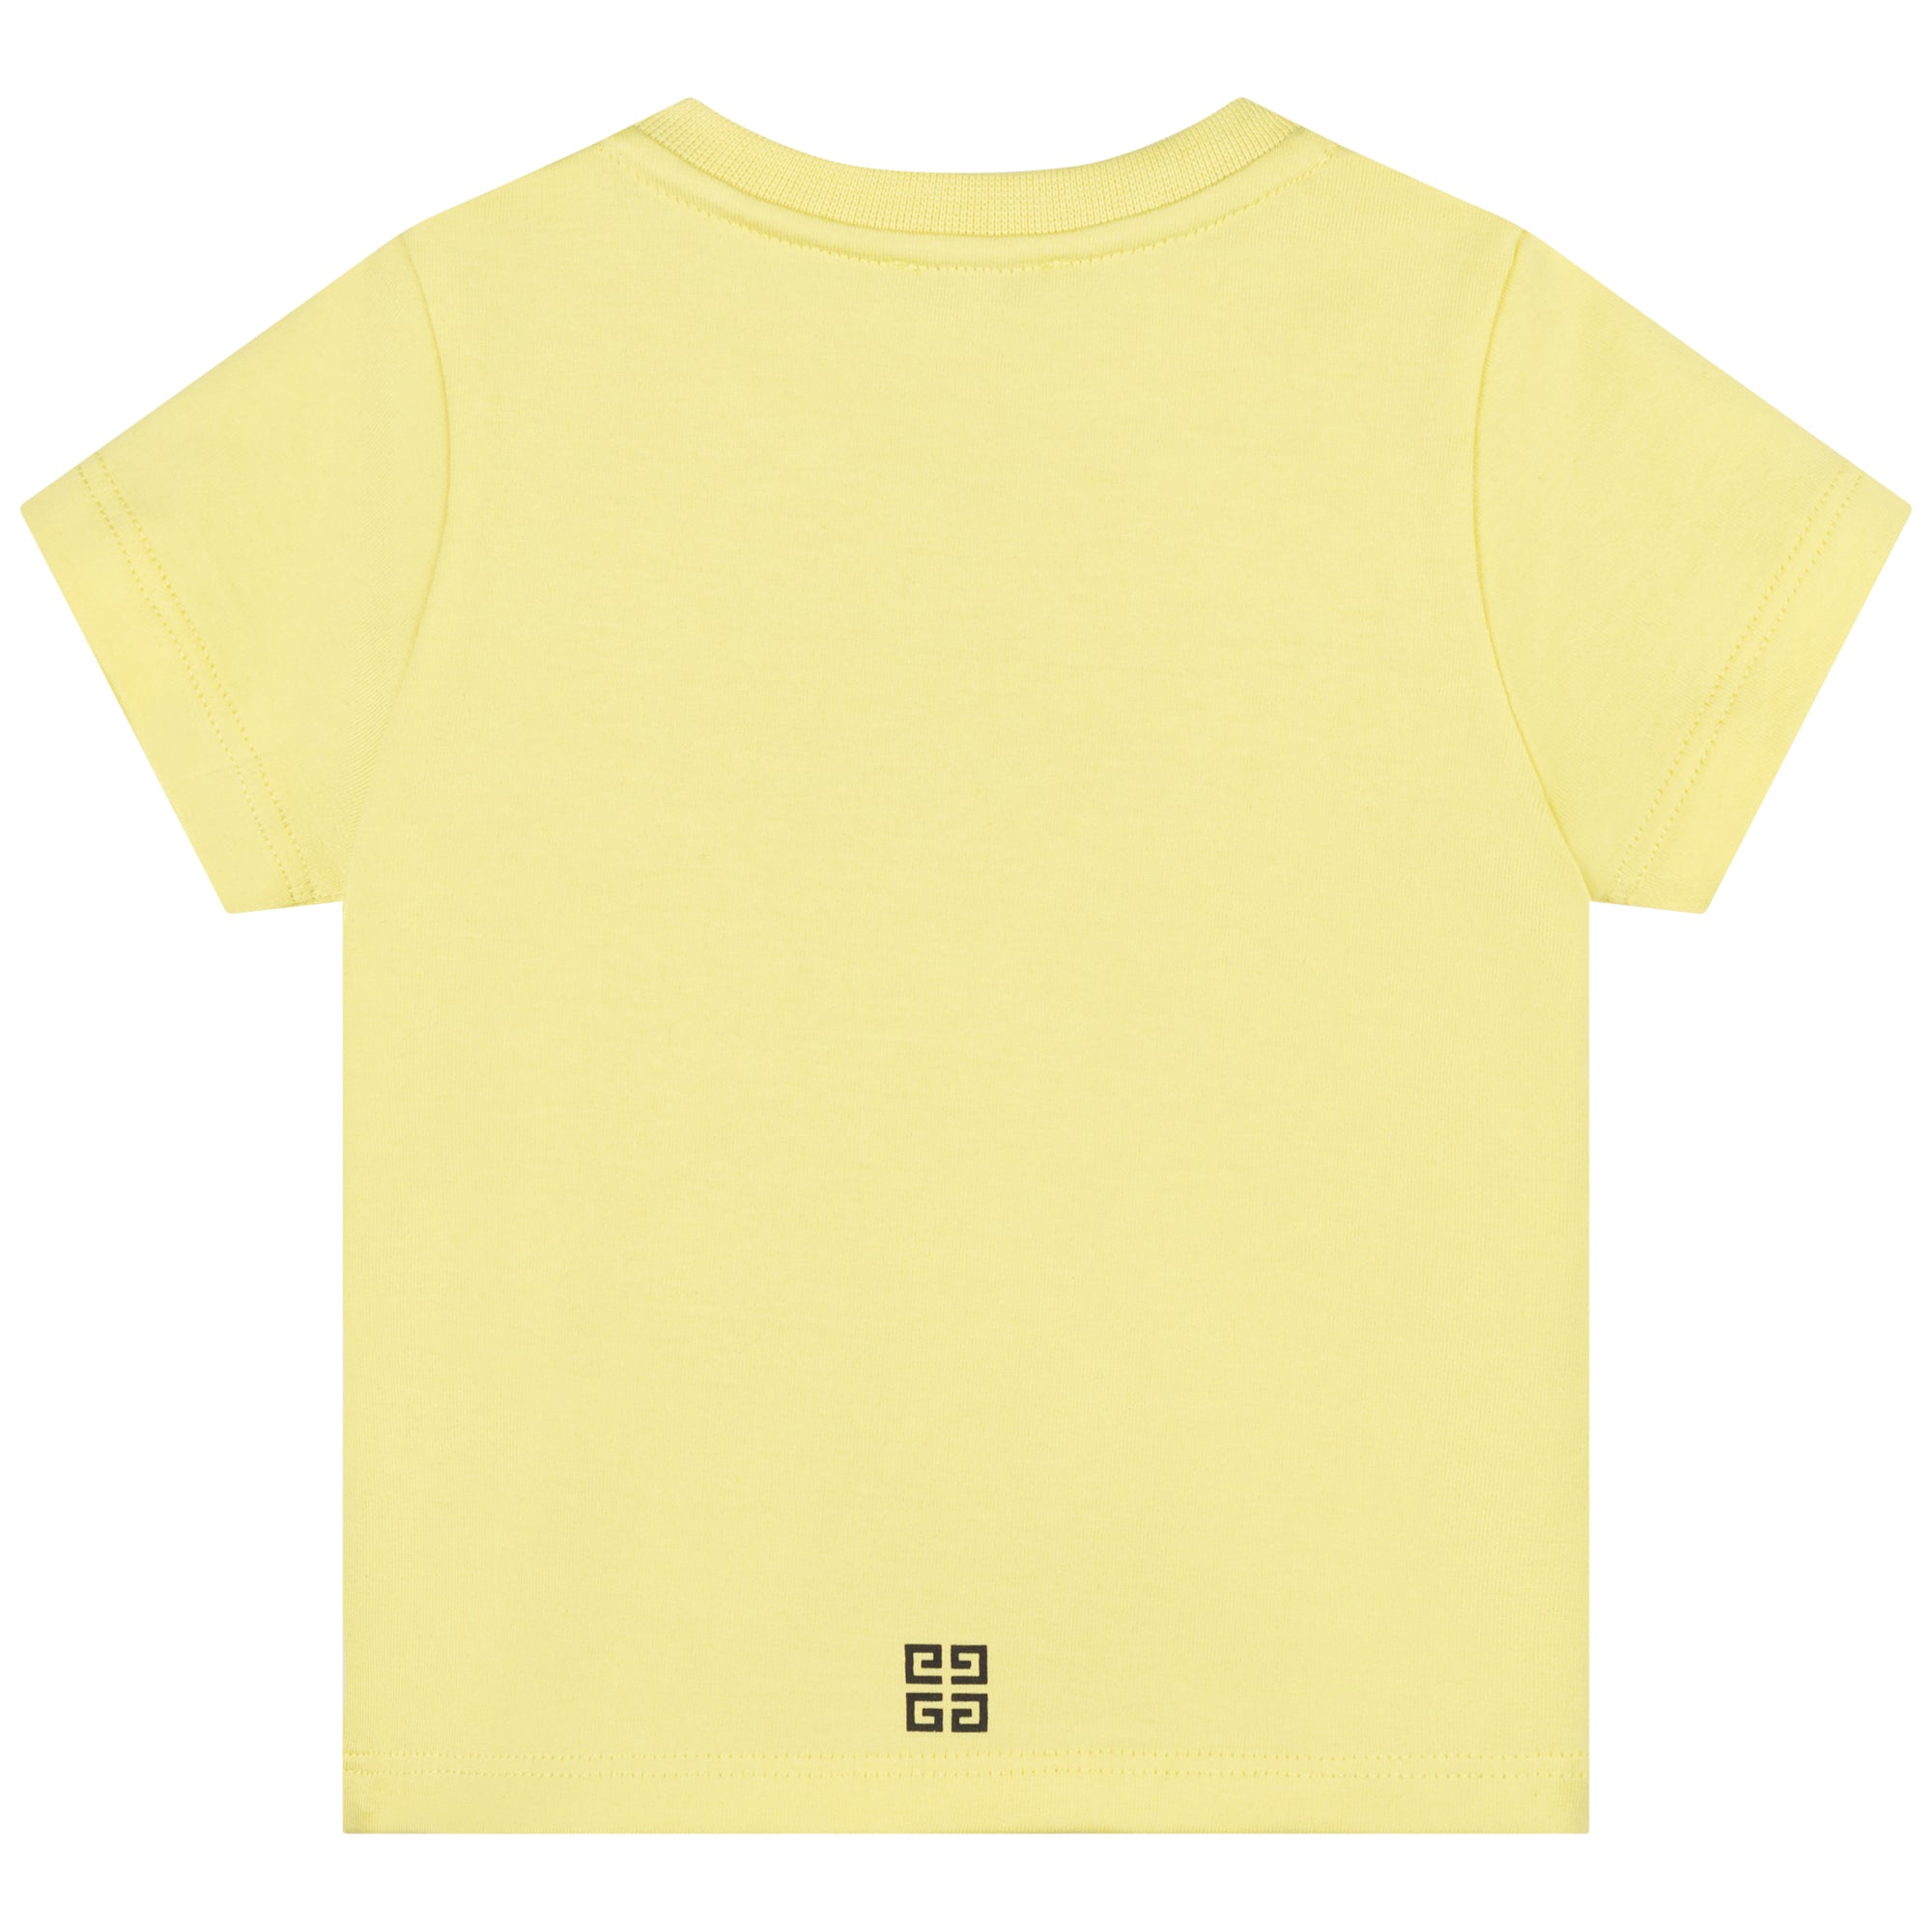 Givenchy Baby Boys Yellow T-Shirt